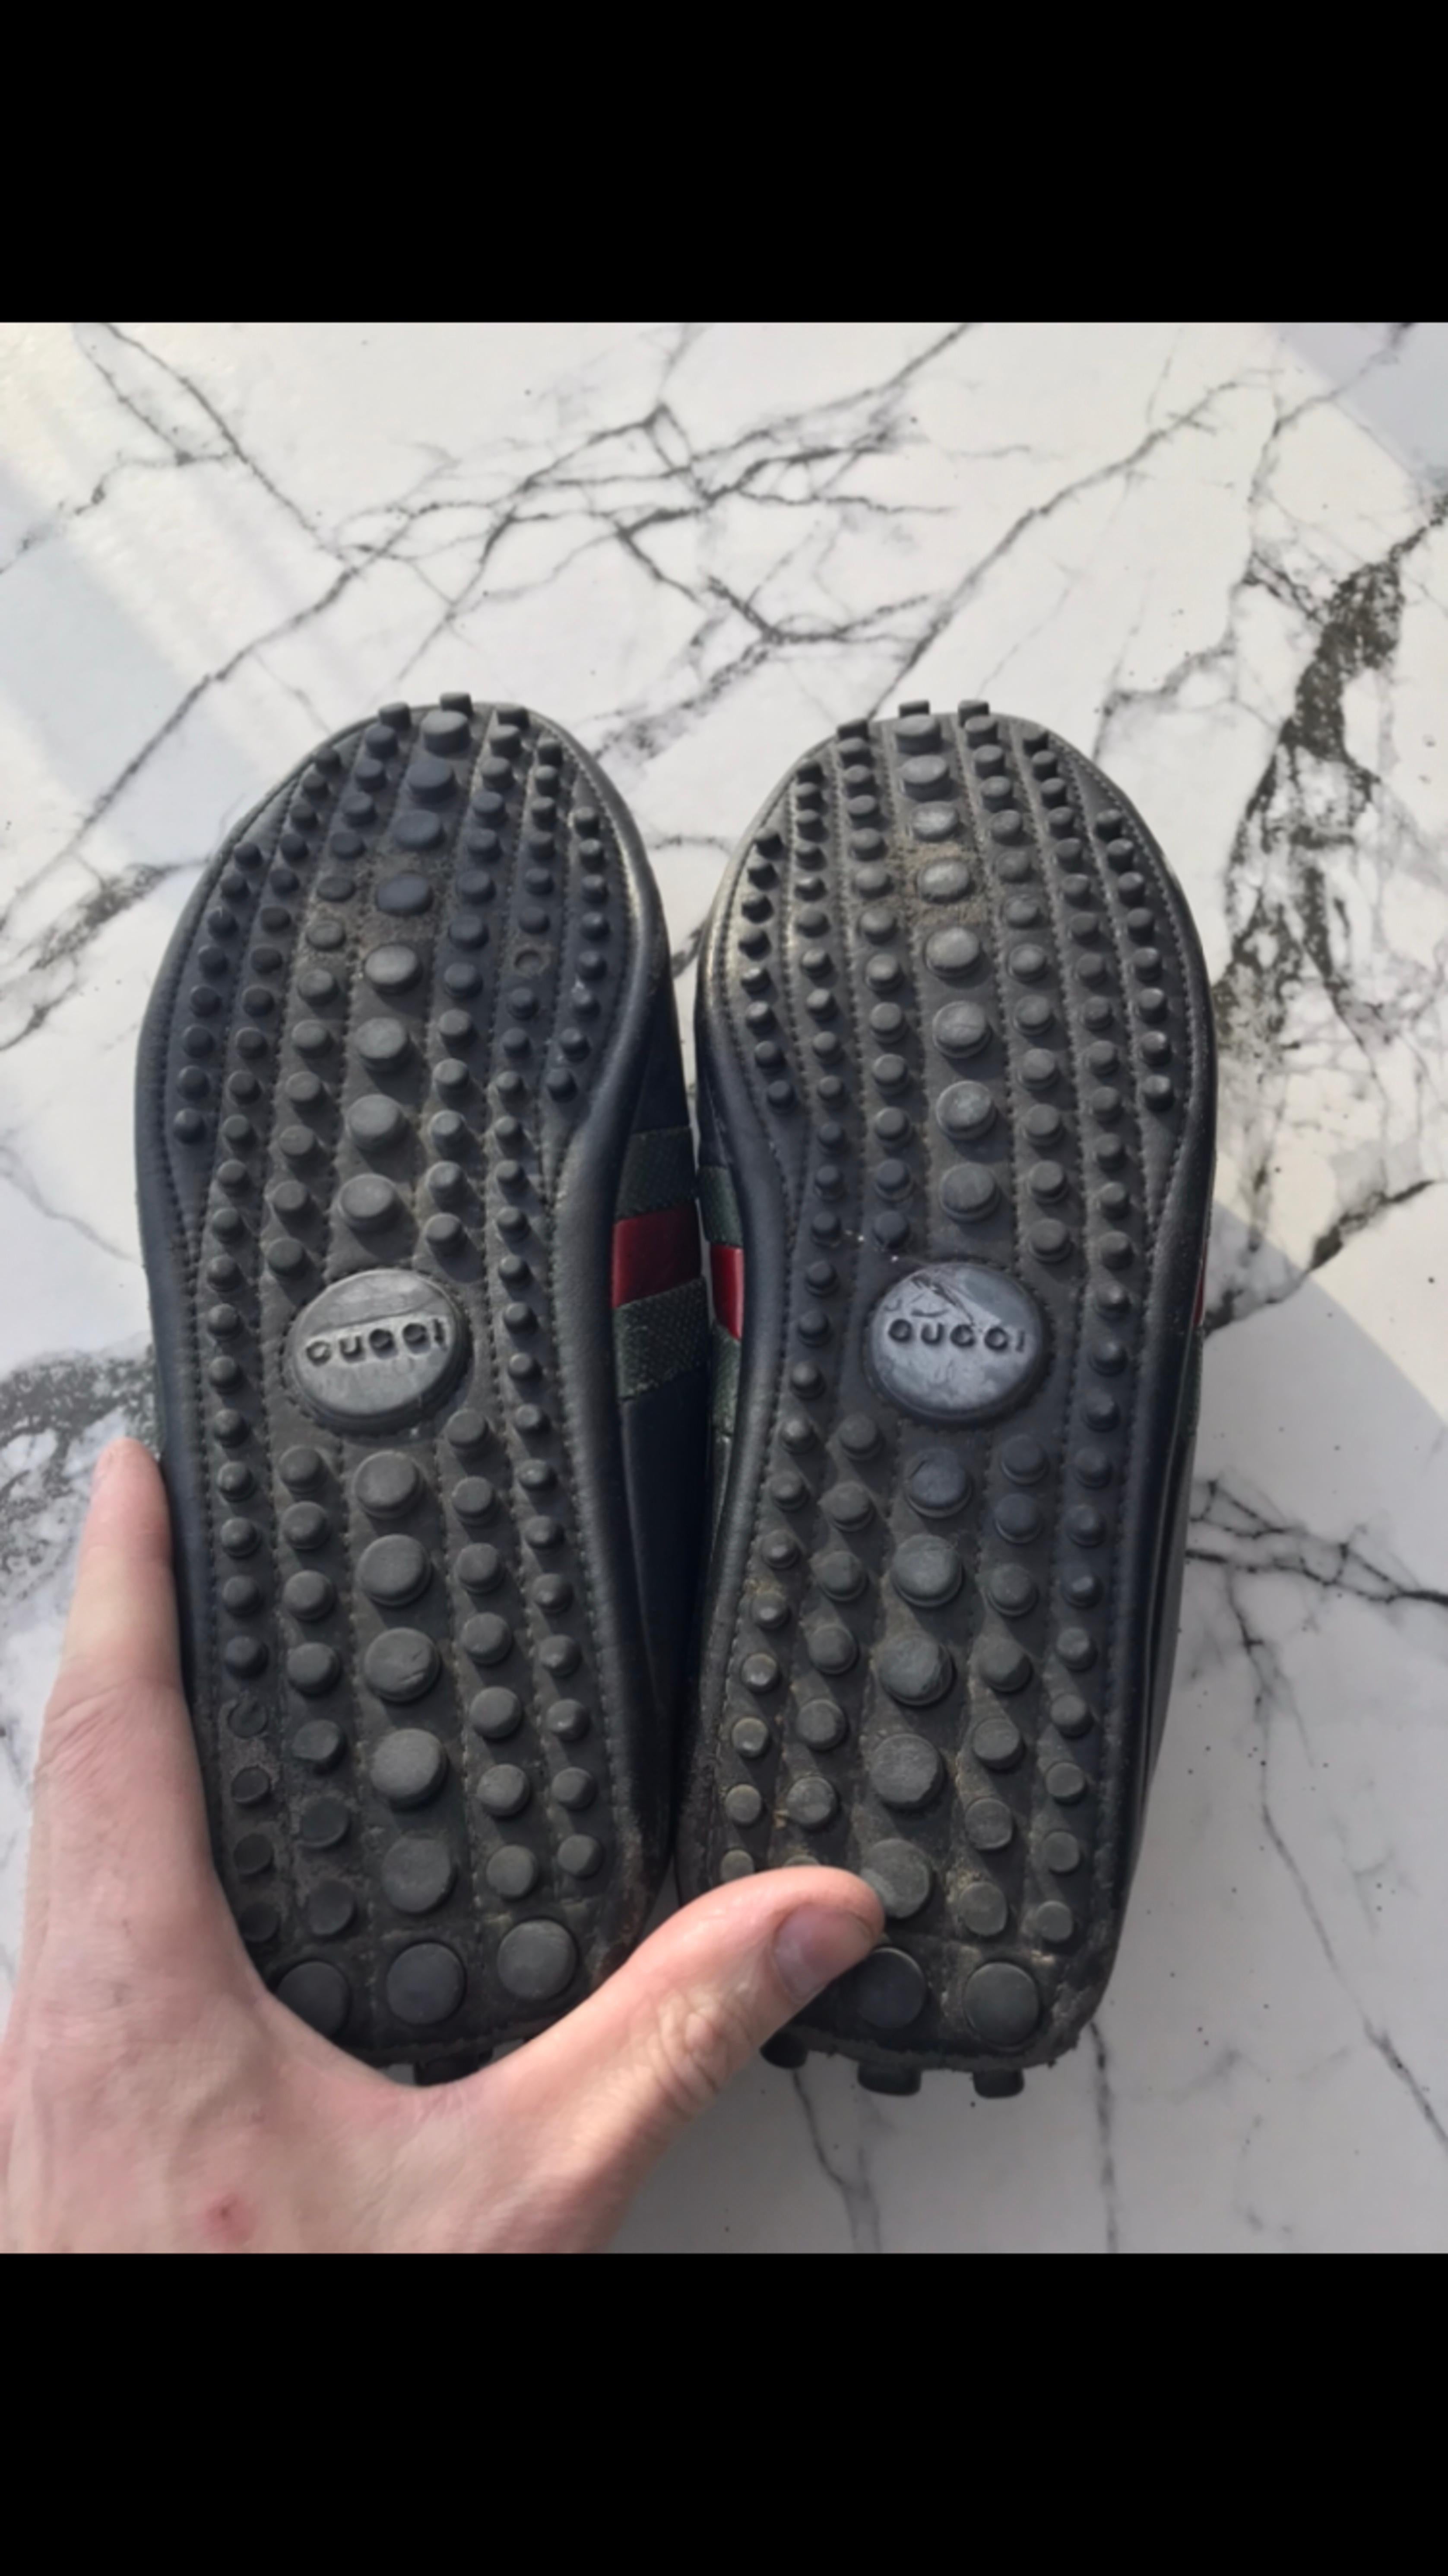 Leather gucci men's sneakers For Sale